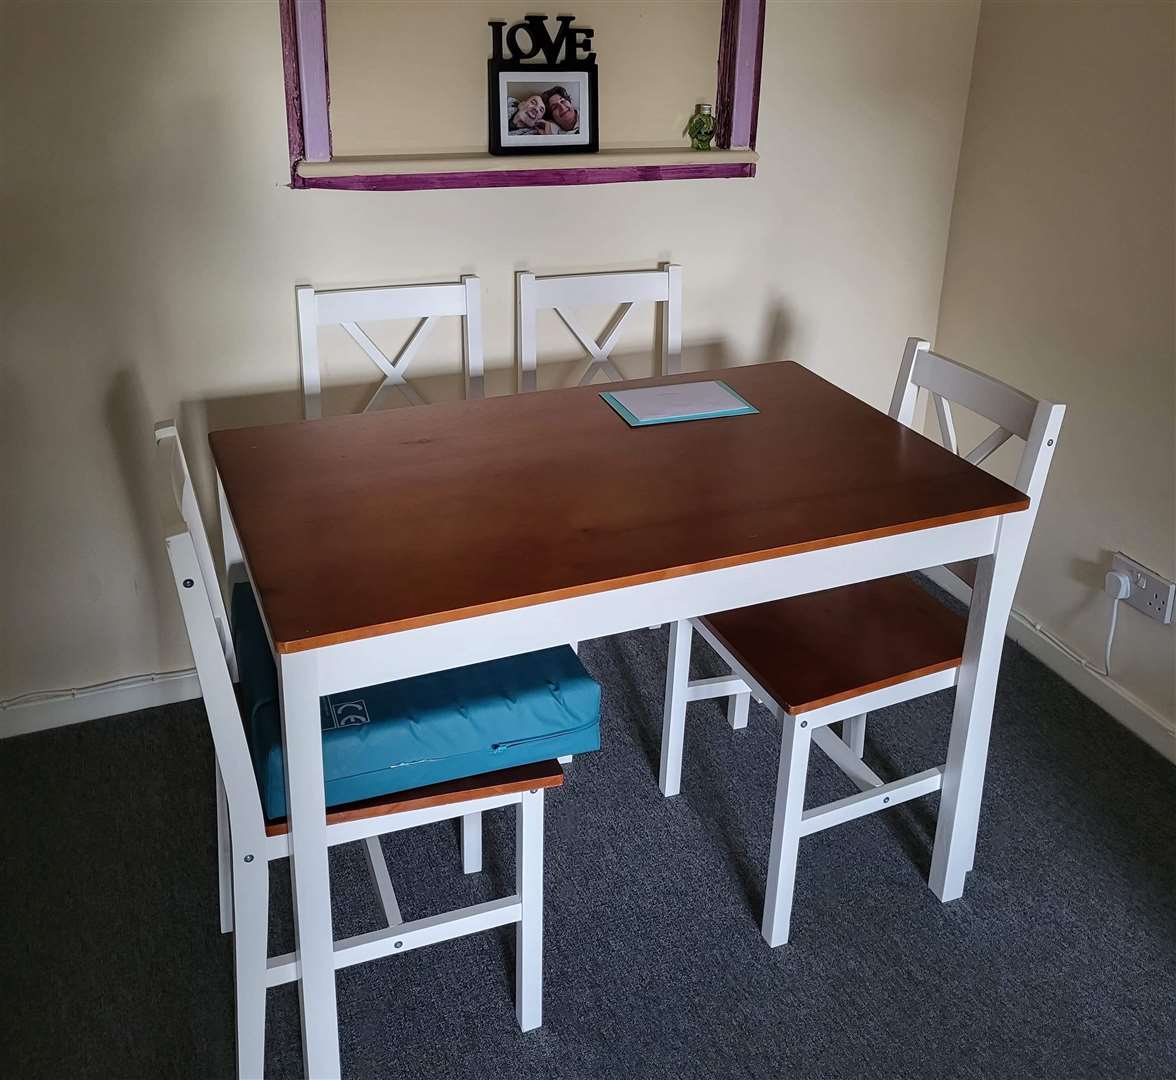 Claire received multiple donations from people living in the area after posting a plea for furniture on Facebook. Picture: Claire Waterman